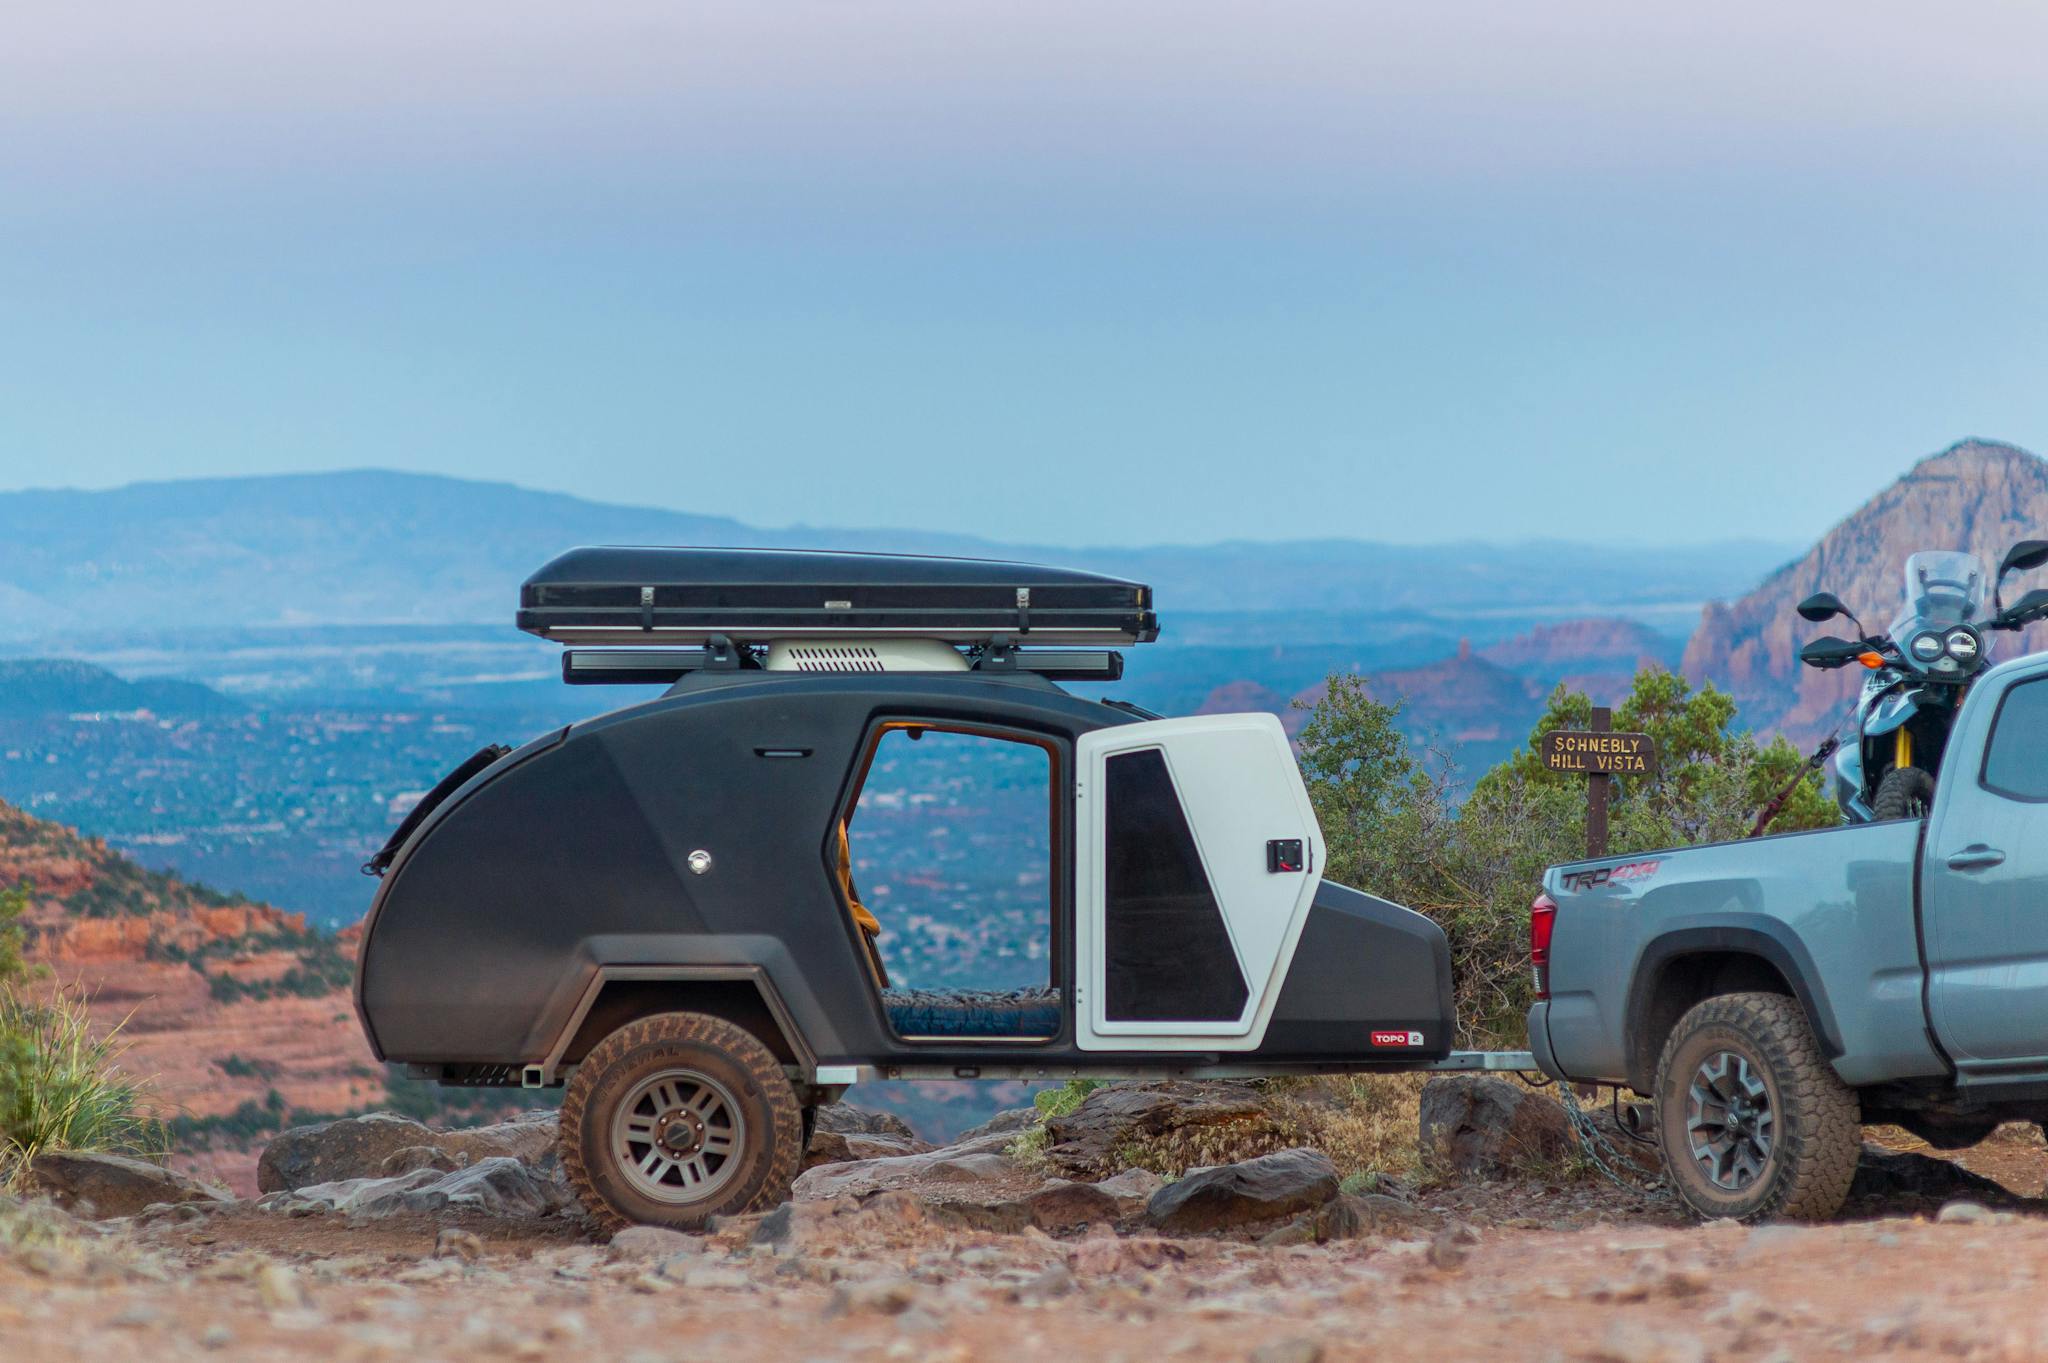 A TOPO2 teardrop camper sits atop Schnebly Hill above Sedona, Arizona at dawn. The doors are open revealing the city below.